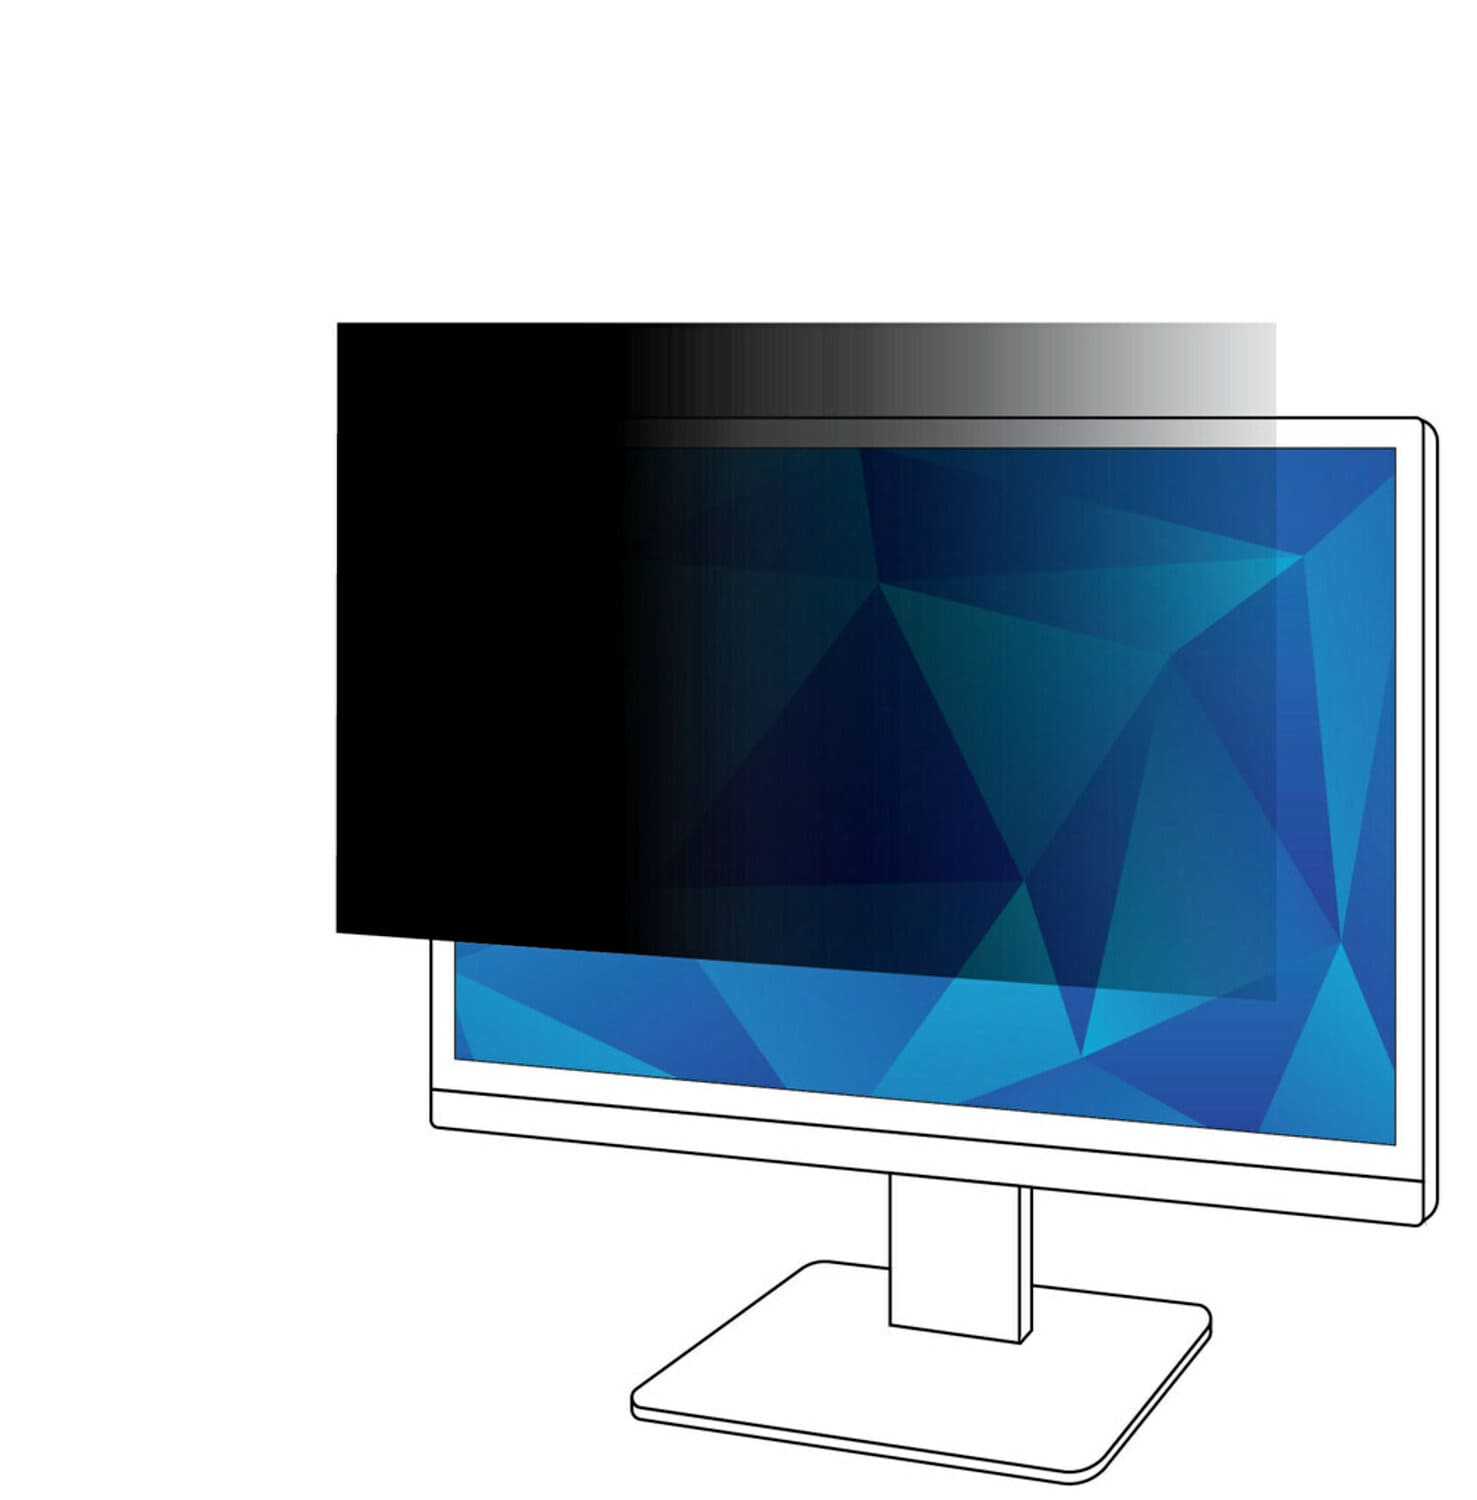 7100143039 - 3M Privacy Filter for 28in Monitor, 16:9, PF280W9B